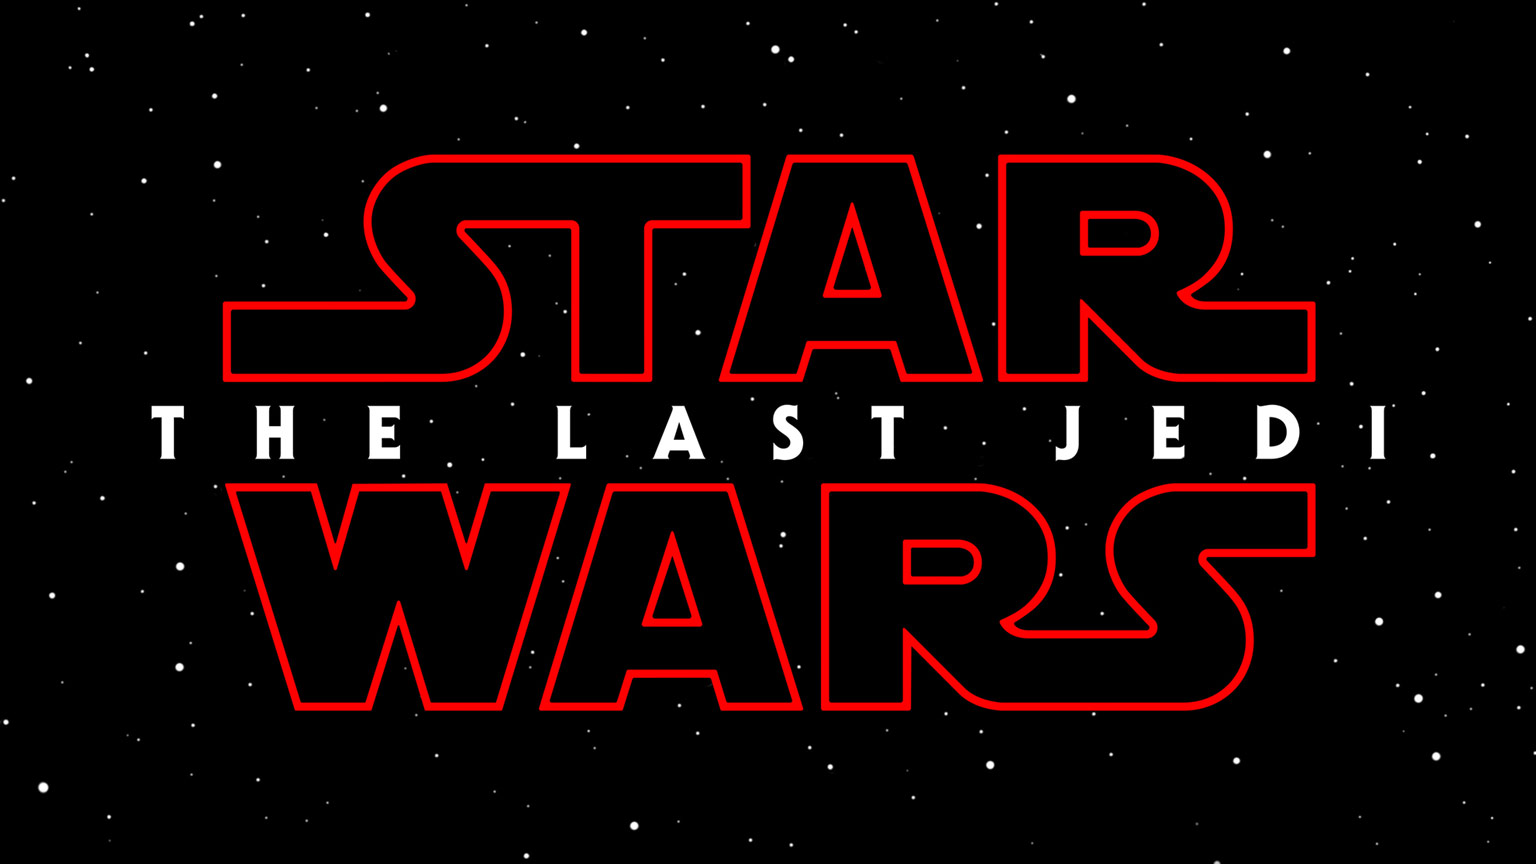 Watch the Star Wars: The Last Jedi Trailer (Official)